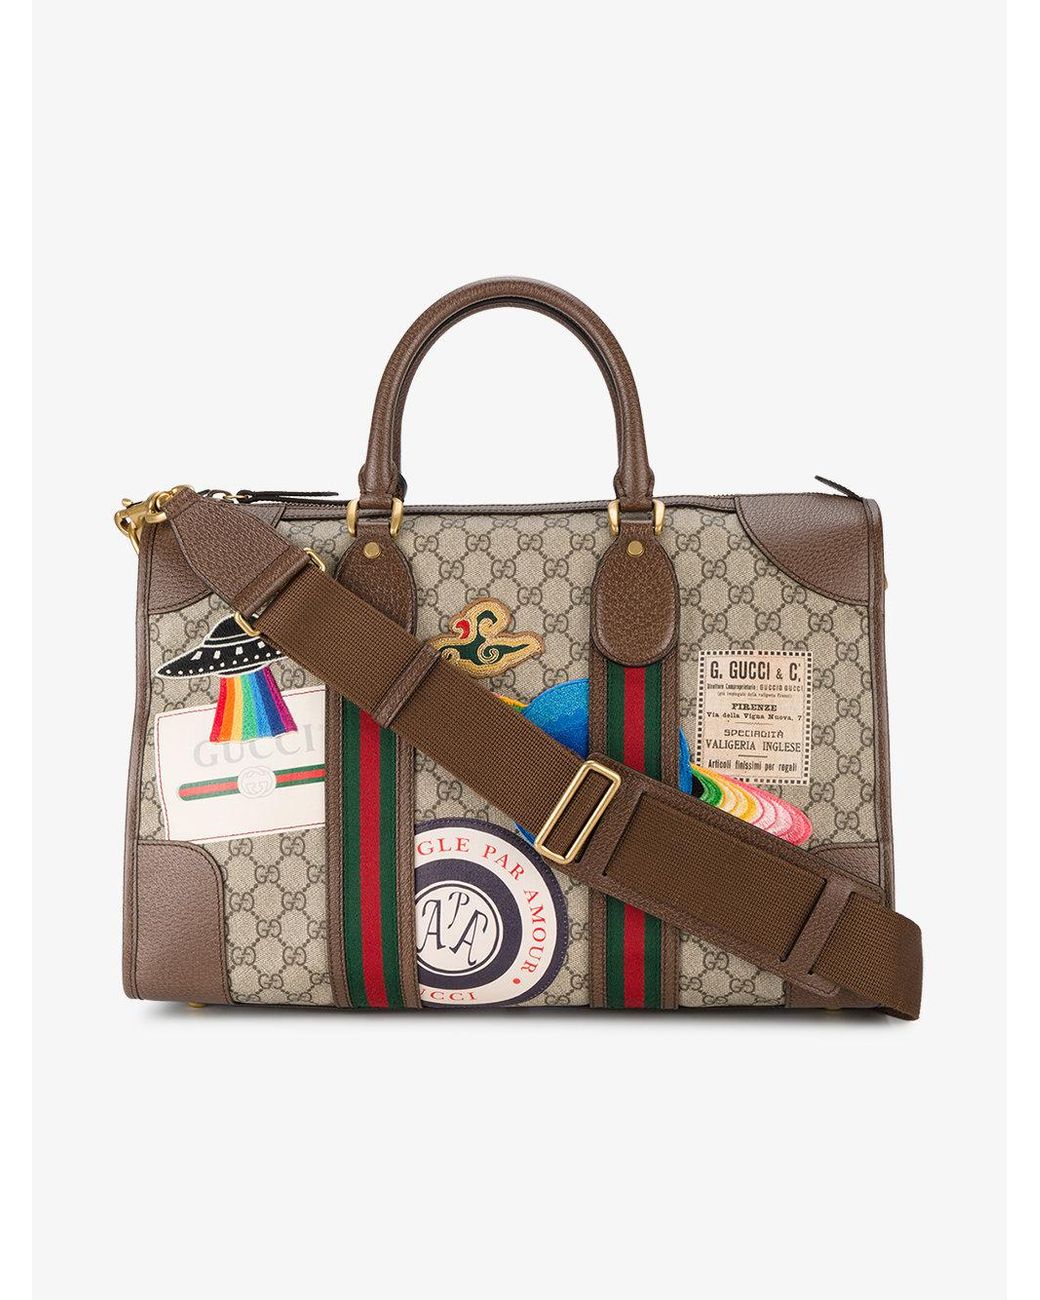 Gucci Courrier Soft Gg Supreme Duffle Bag | Lyst